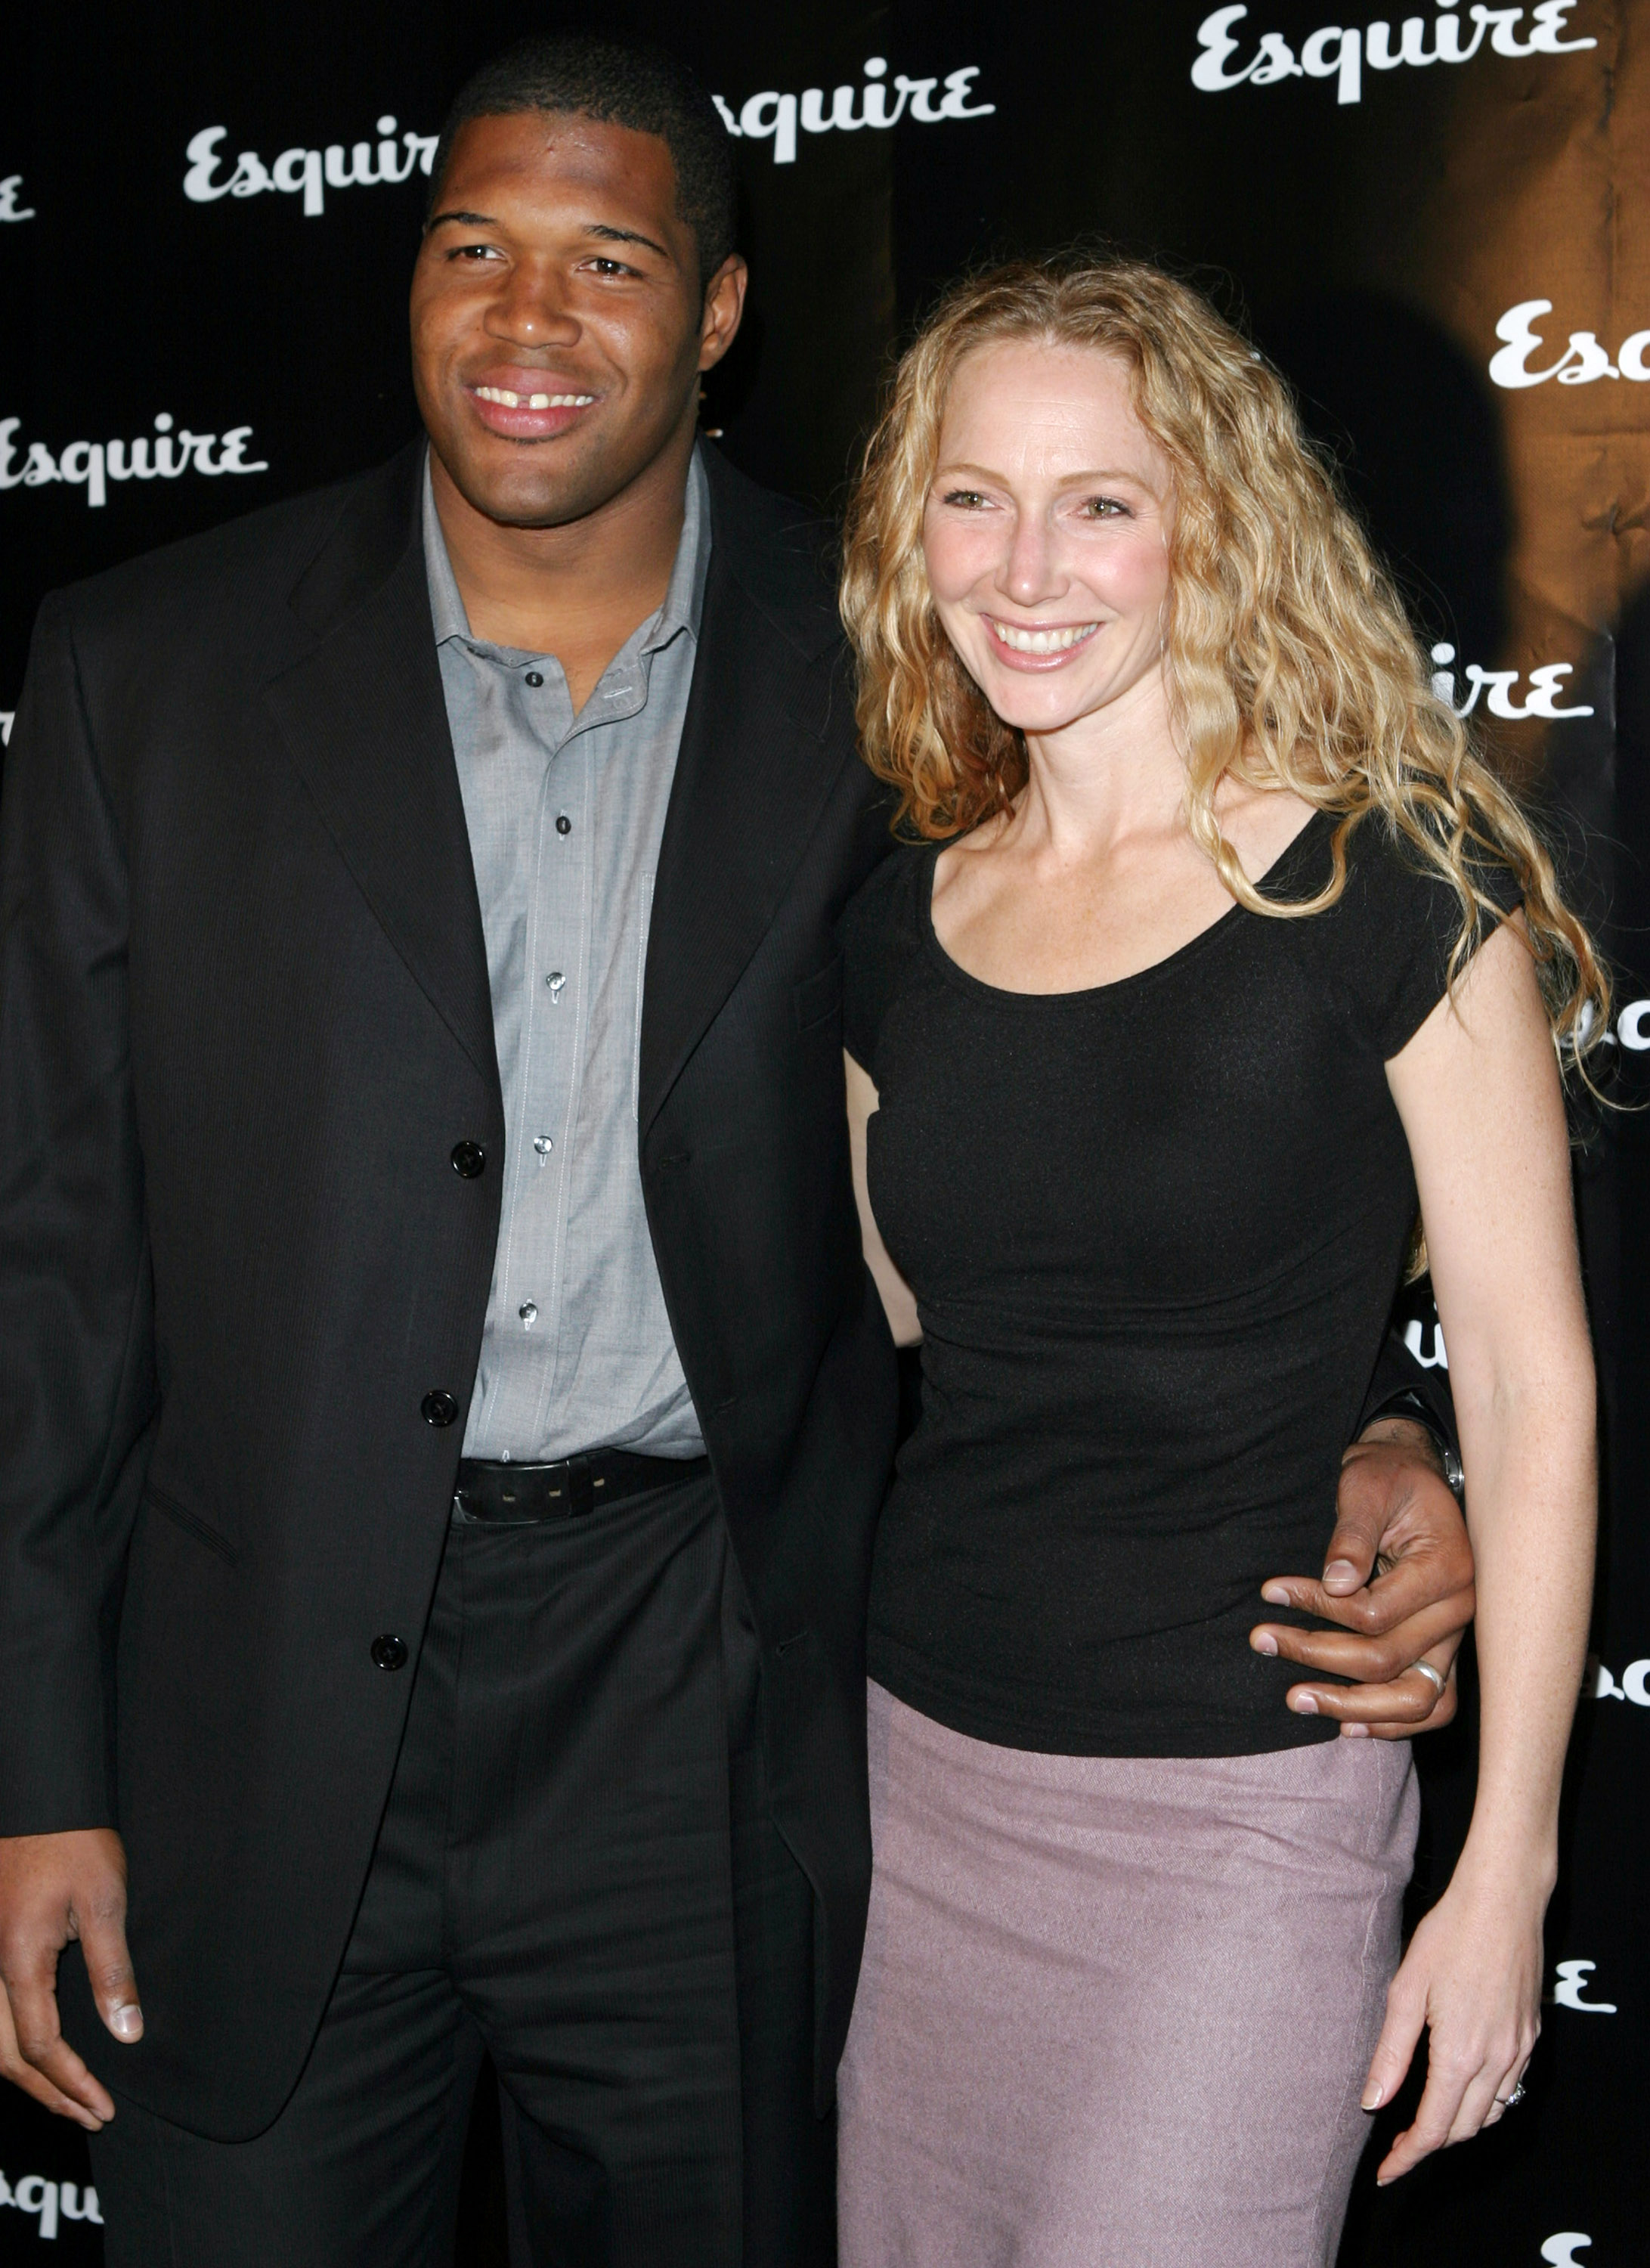 Michael Strahan and Jean Muggli at the Esquire Apartment Launch Party in New York City in 2003. | Source: Getty Images